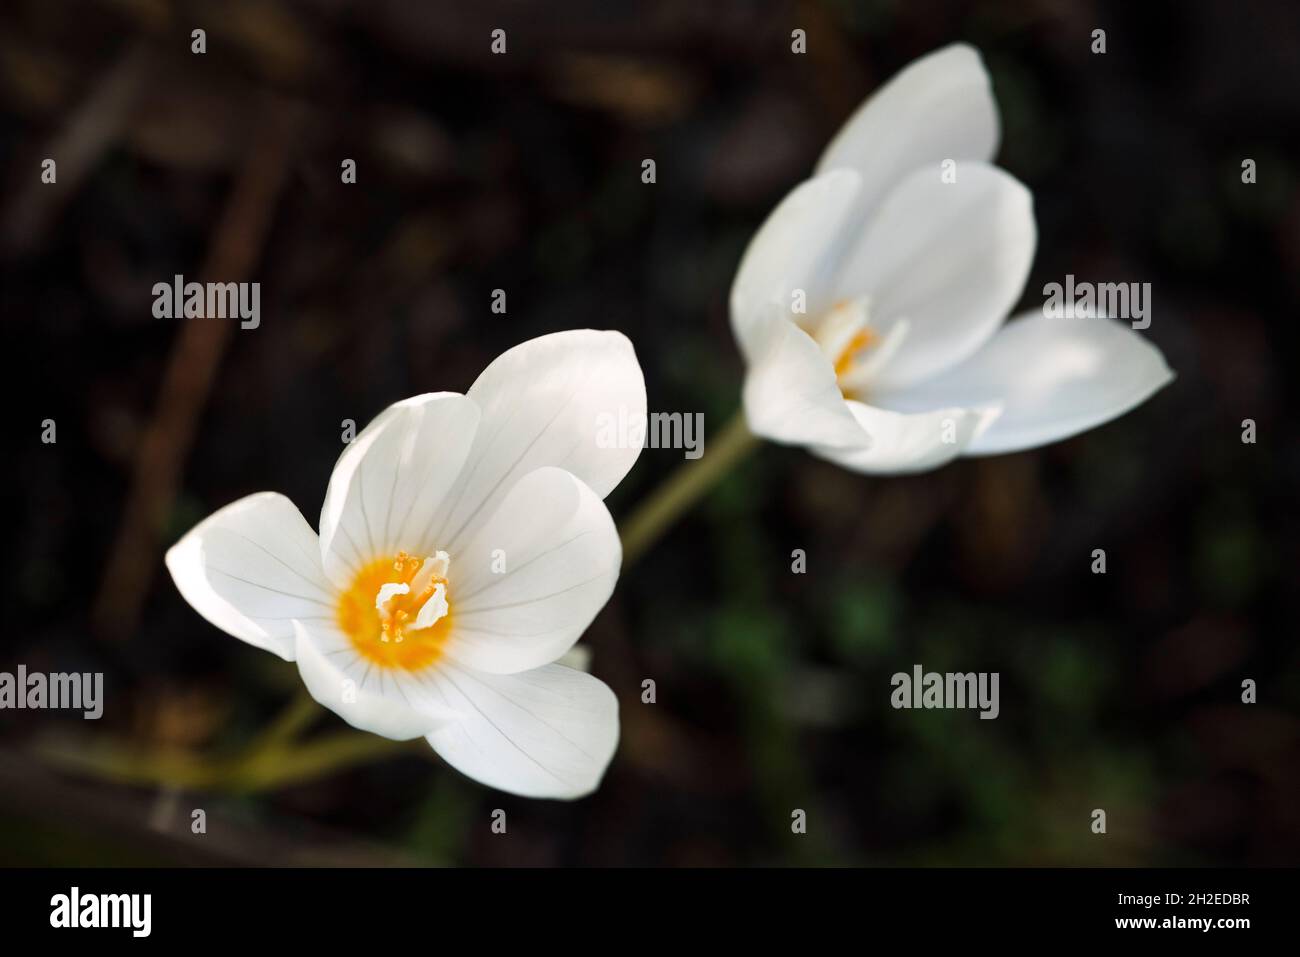 The toxic 'Autumn crocus' ( Colchicum ) (Fall Crocus) with 6 stamens and 3 styles as opposed to the Spring form with 90 species, 3 stamens and 1 style Stock Photo